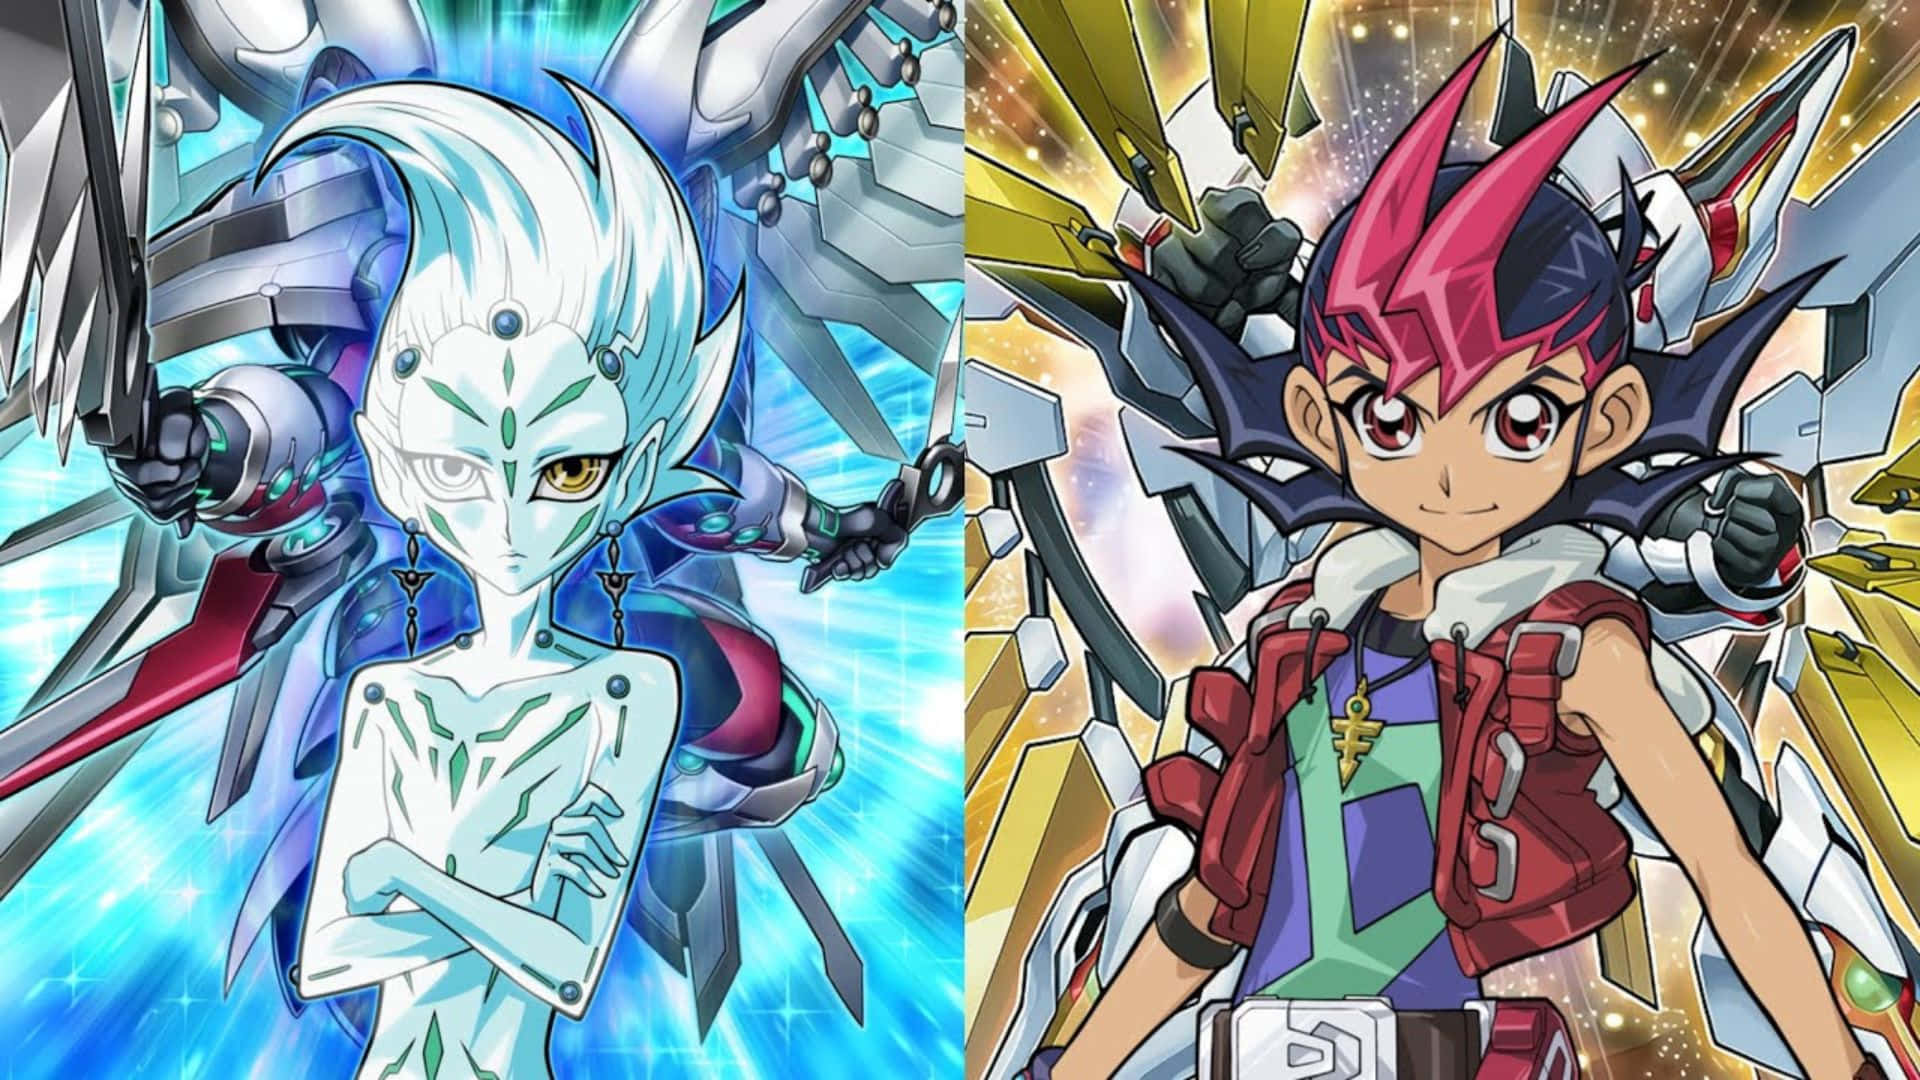 Astral, the Mysterious Entity from Yu-Gi-Oh! ZEXAL Wallpaper